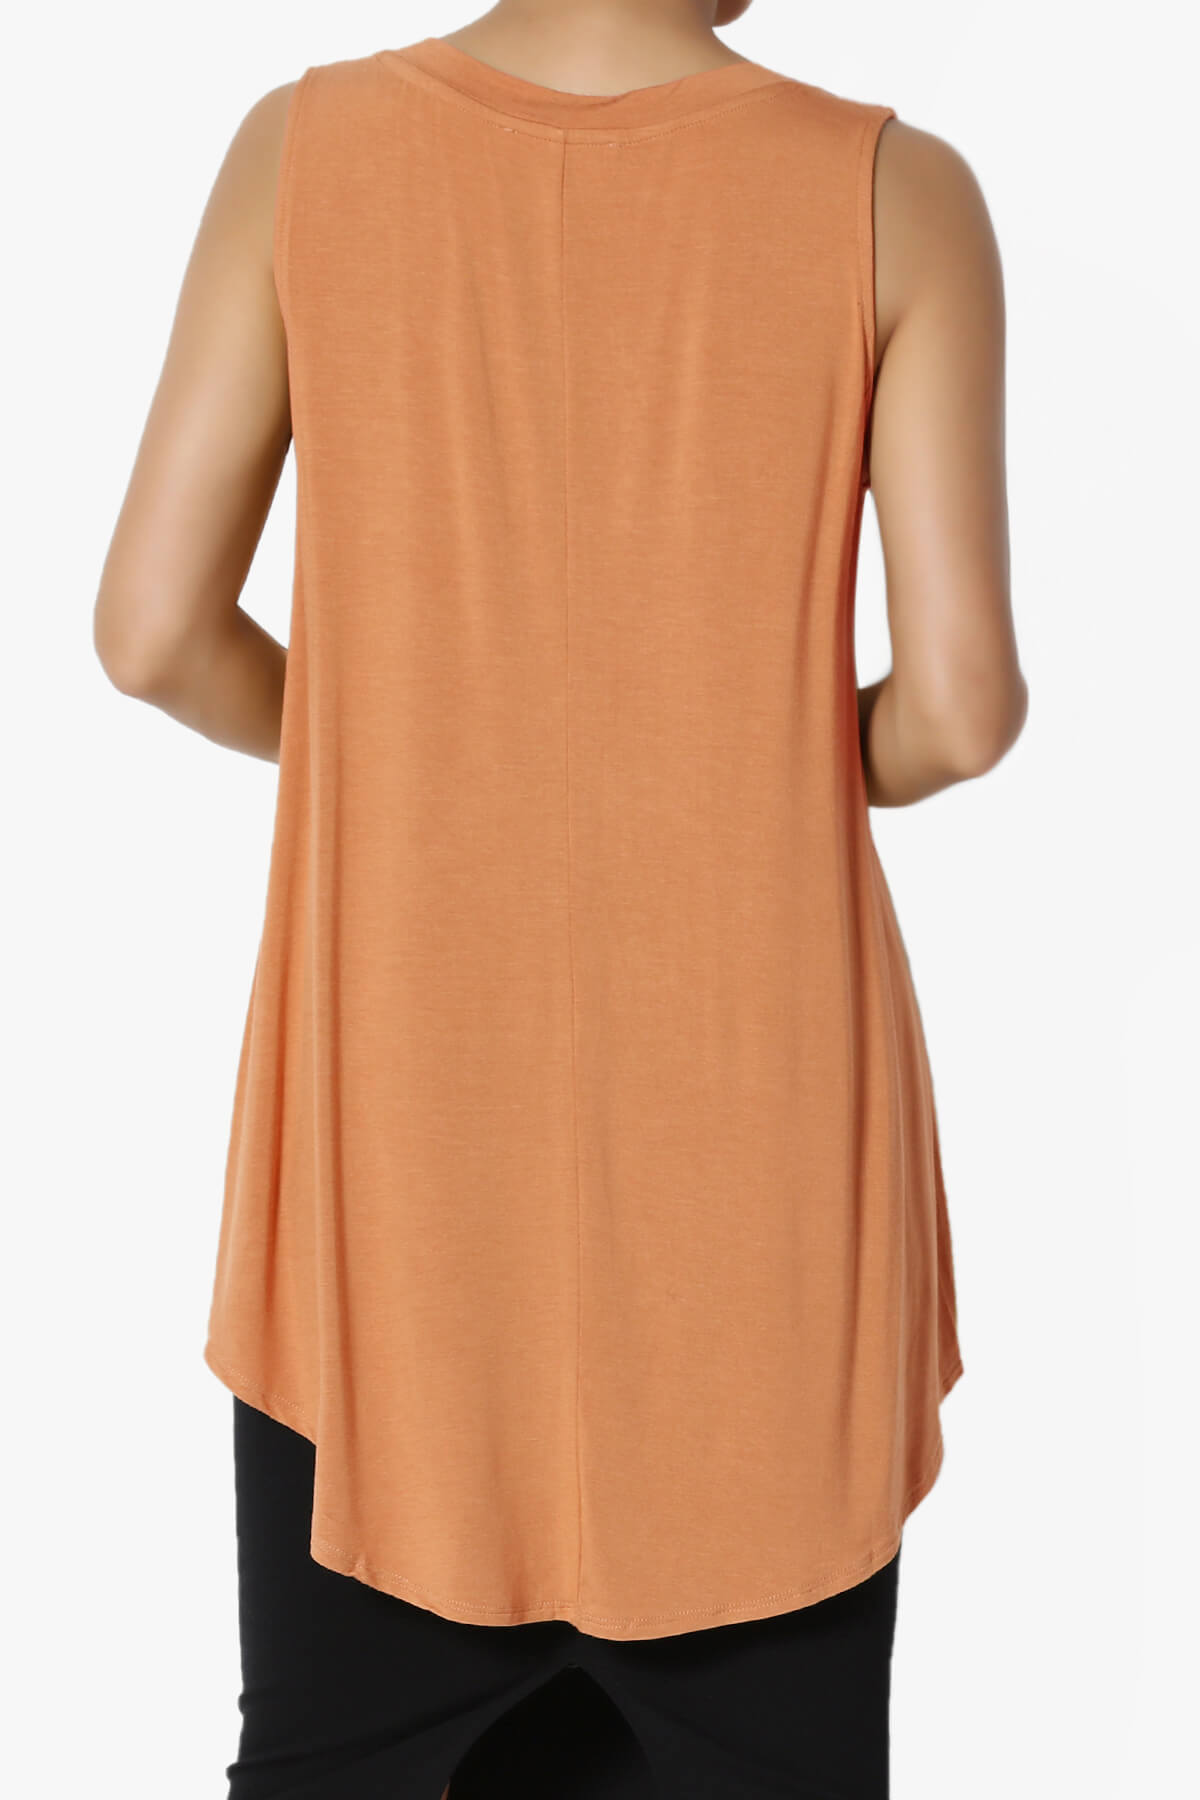 Load image into Gallery viewer, Myles Sleeveless V-Neck Luxe Jersey Top BUTTER ORANGE_2
